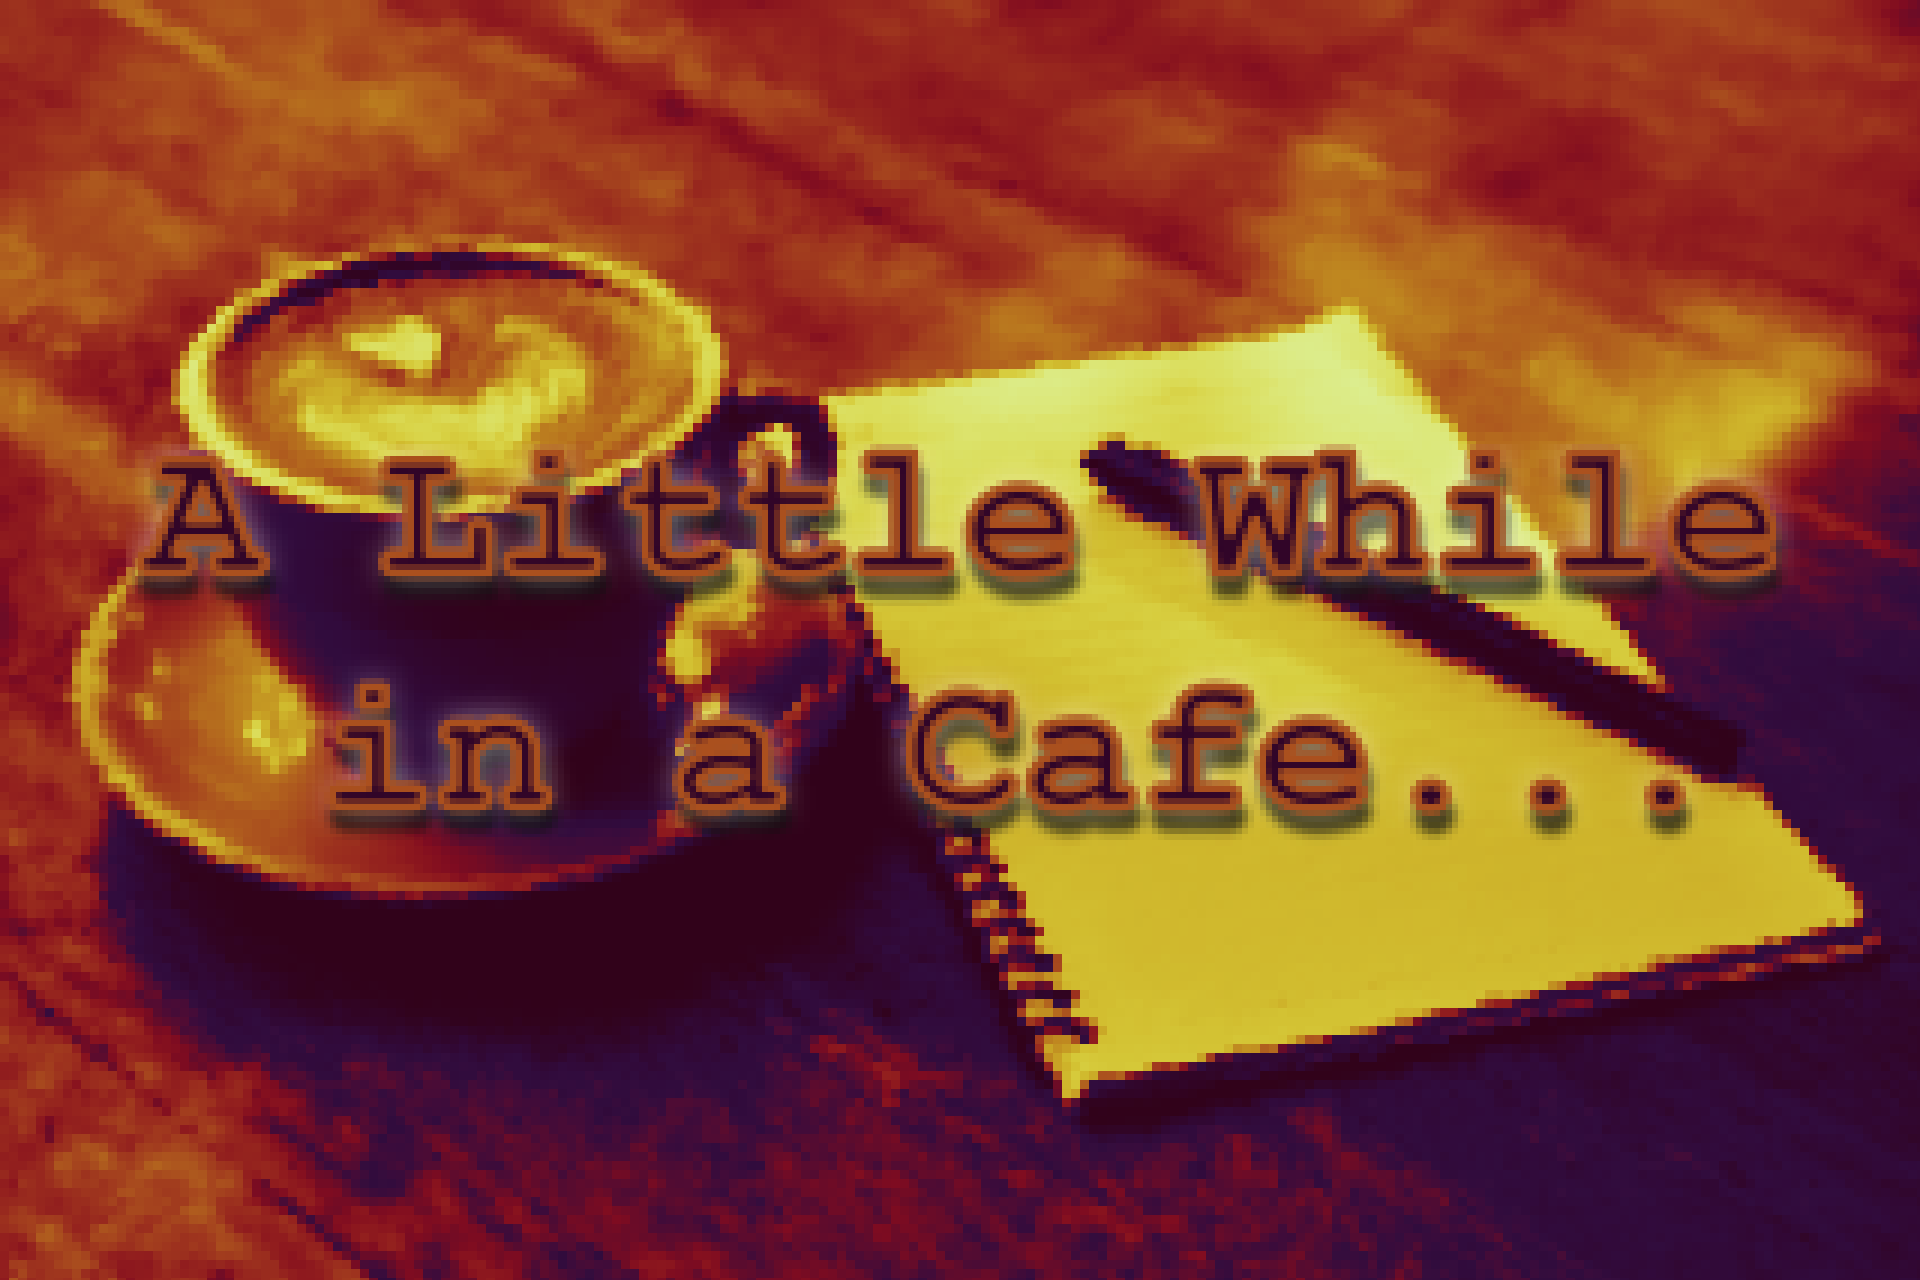 A Little While in a Cafe...